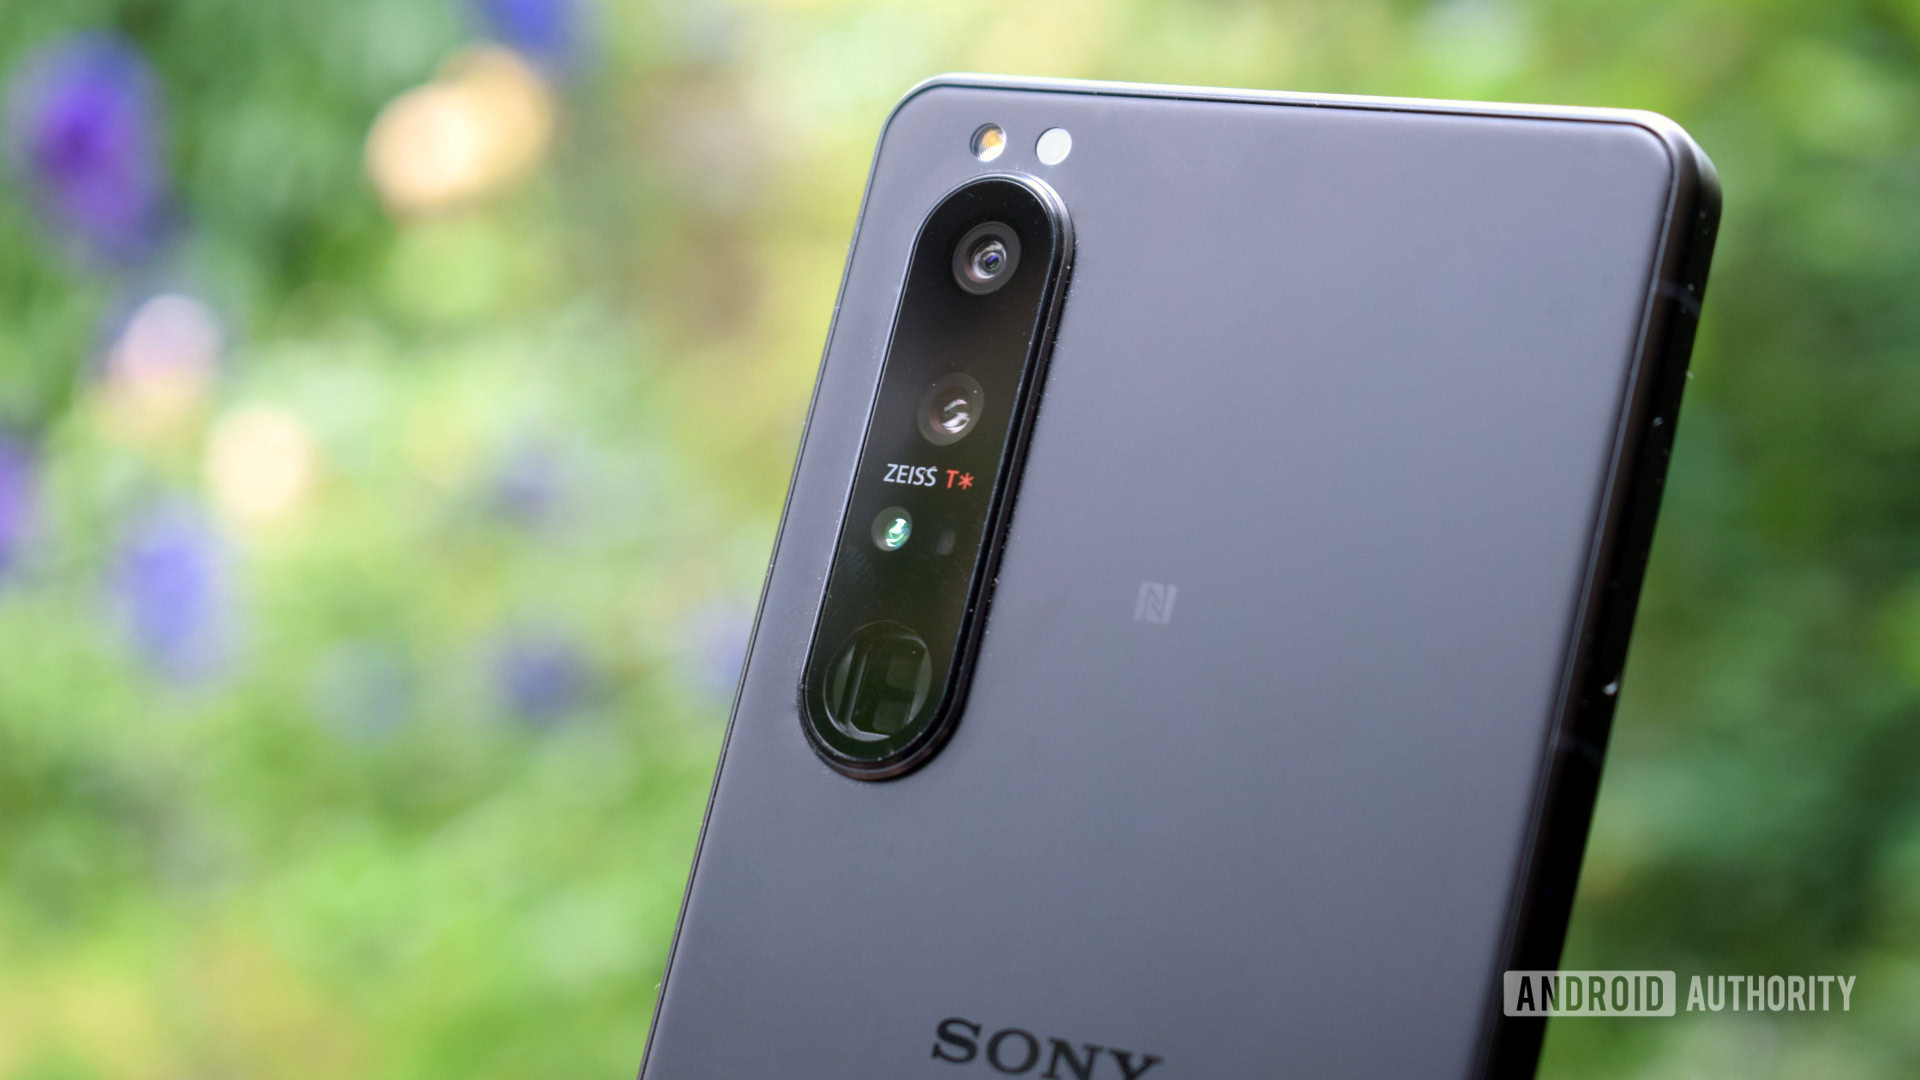 Sony Xperia 1 III rear view showing camera module and Sony logo.